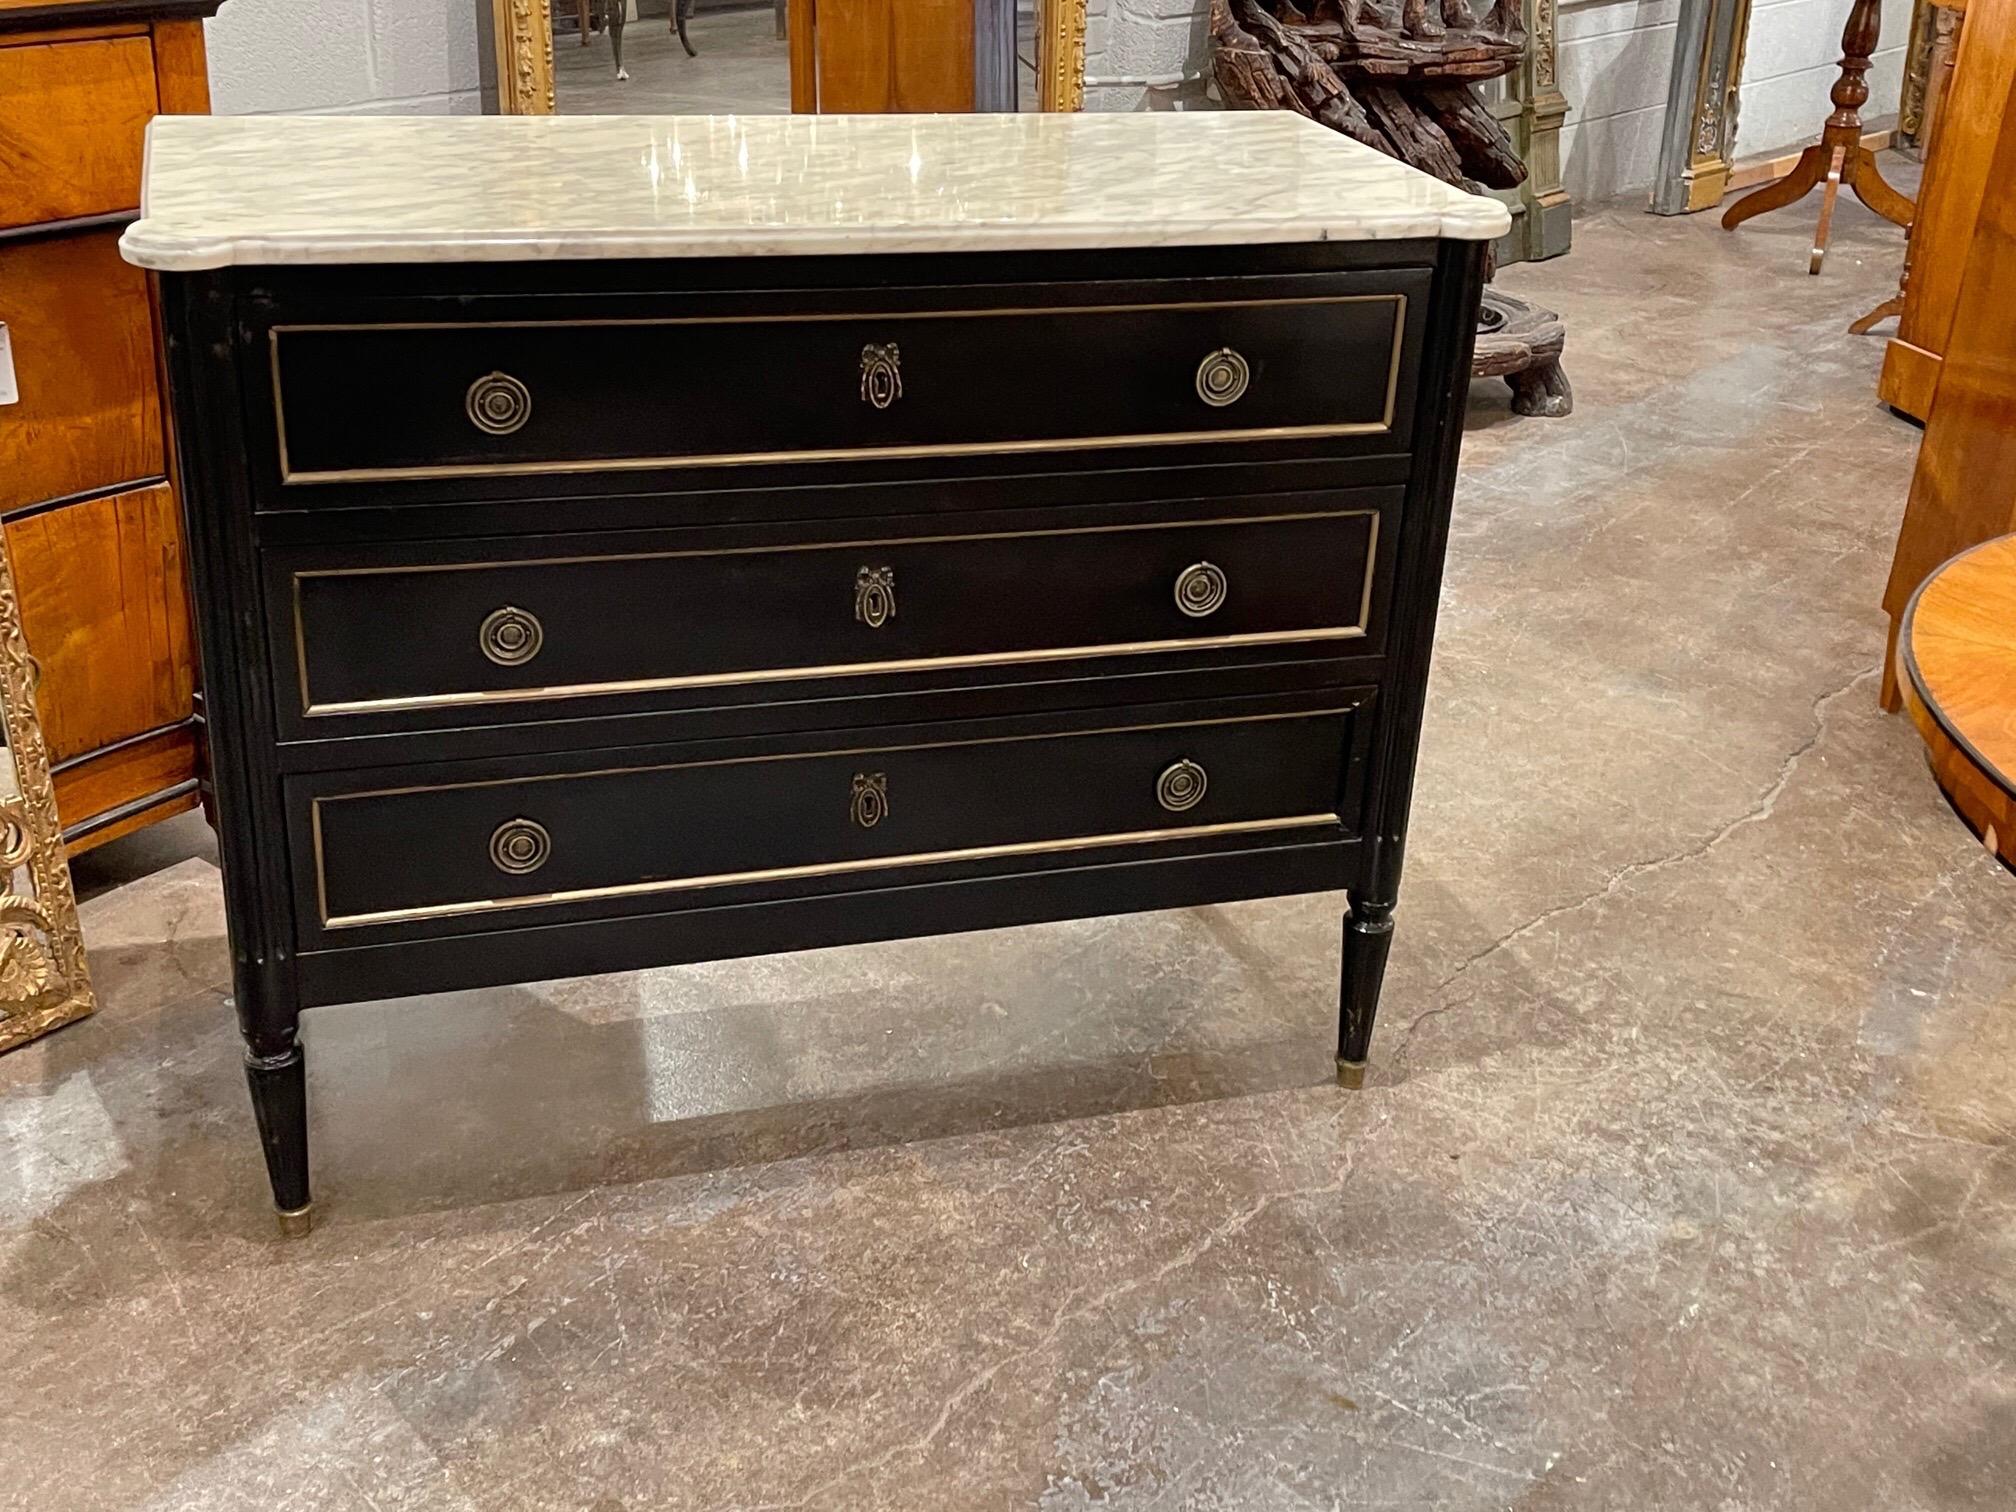 Elegant French Louis XVI style black lacquered chest with beautiful marble top. Nice brass hardware and details as well. A Classic piece!!